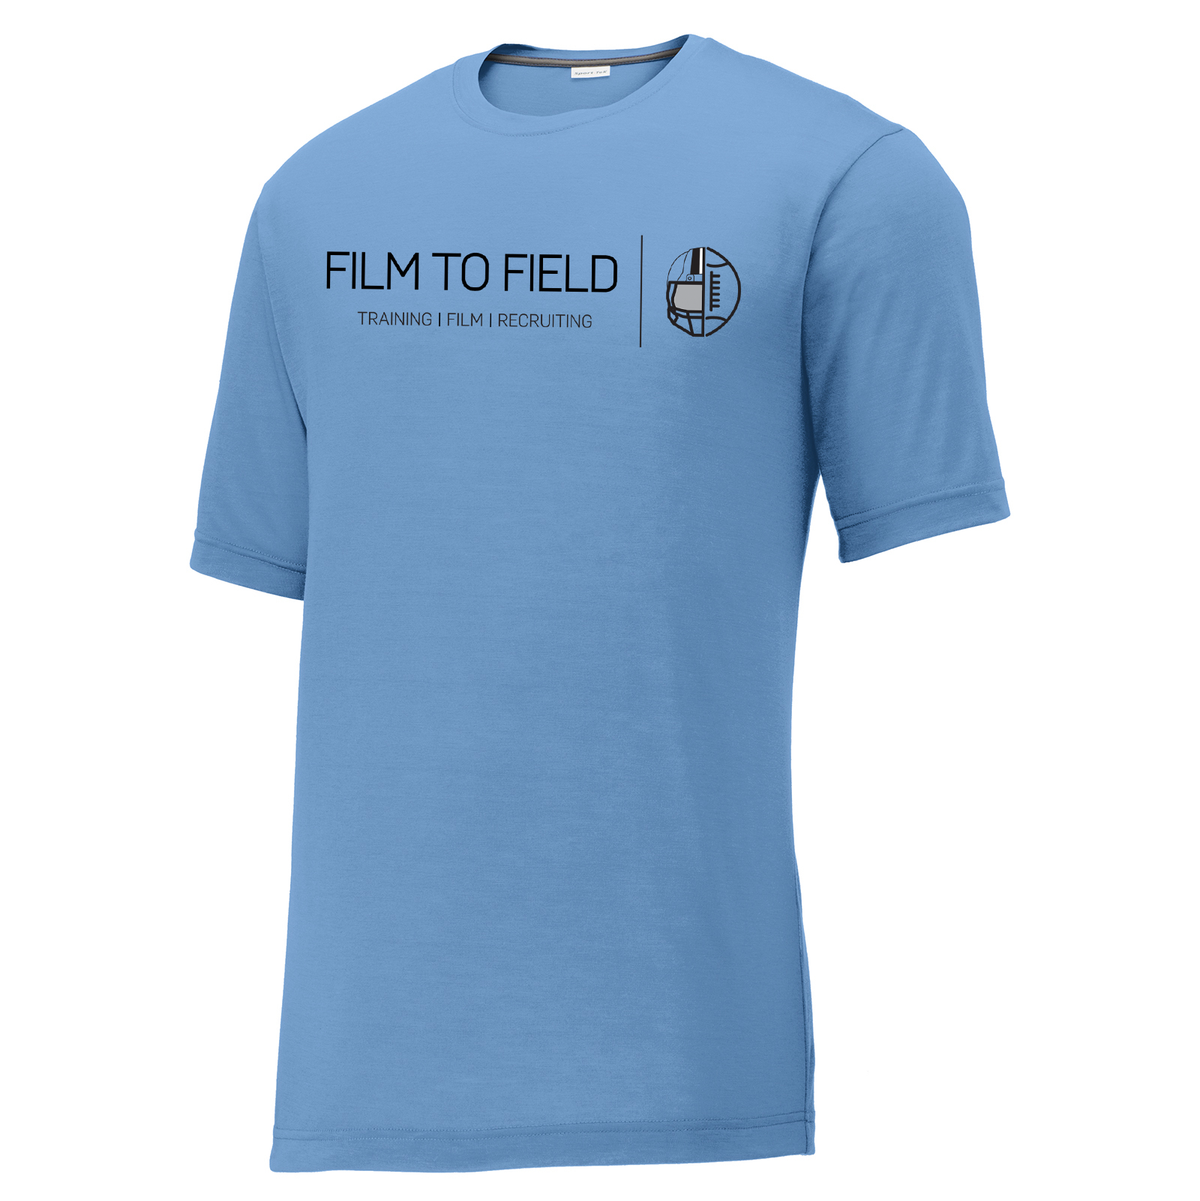 Film to Field CottonTouch Performance T-Shirt